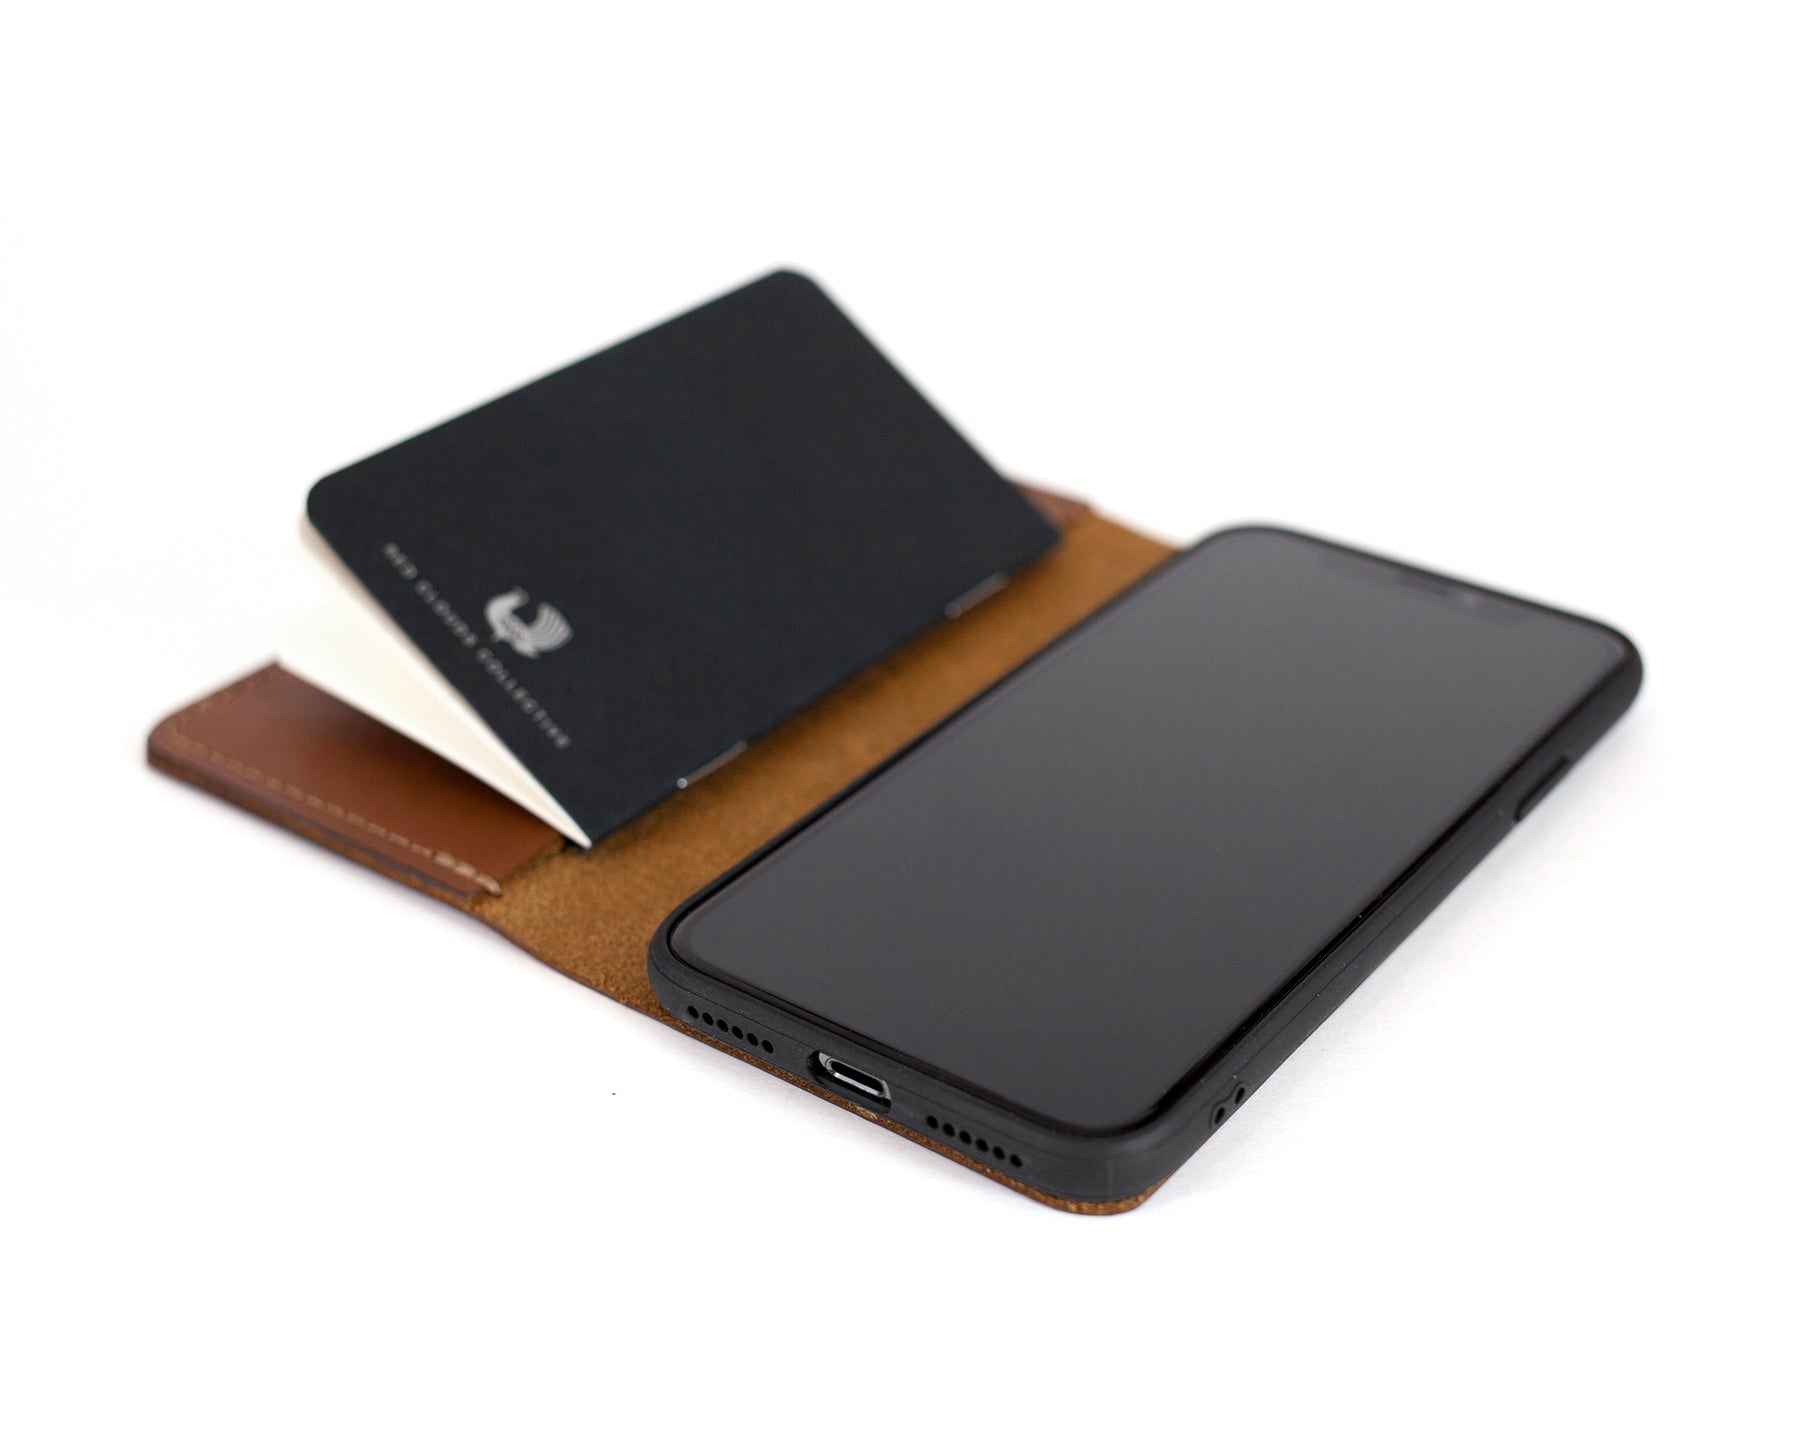 iPhone X leather case, made in the usa, iphone X, iphone wallet, leather iphone X case, new iphone, most recent iphone, iphone update, iphone 10